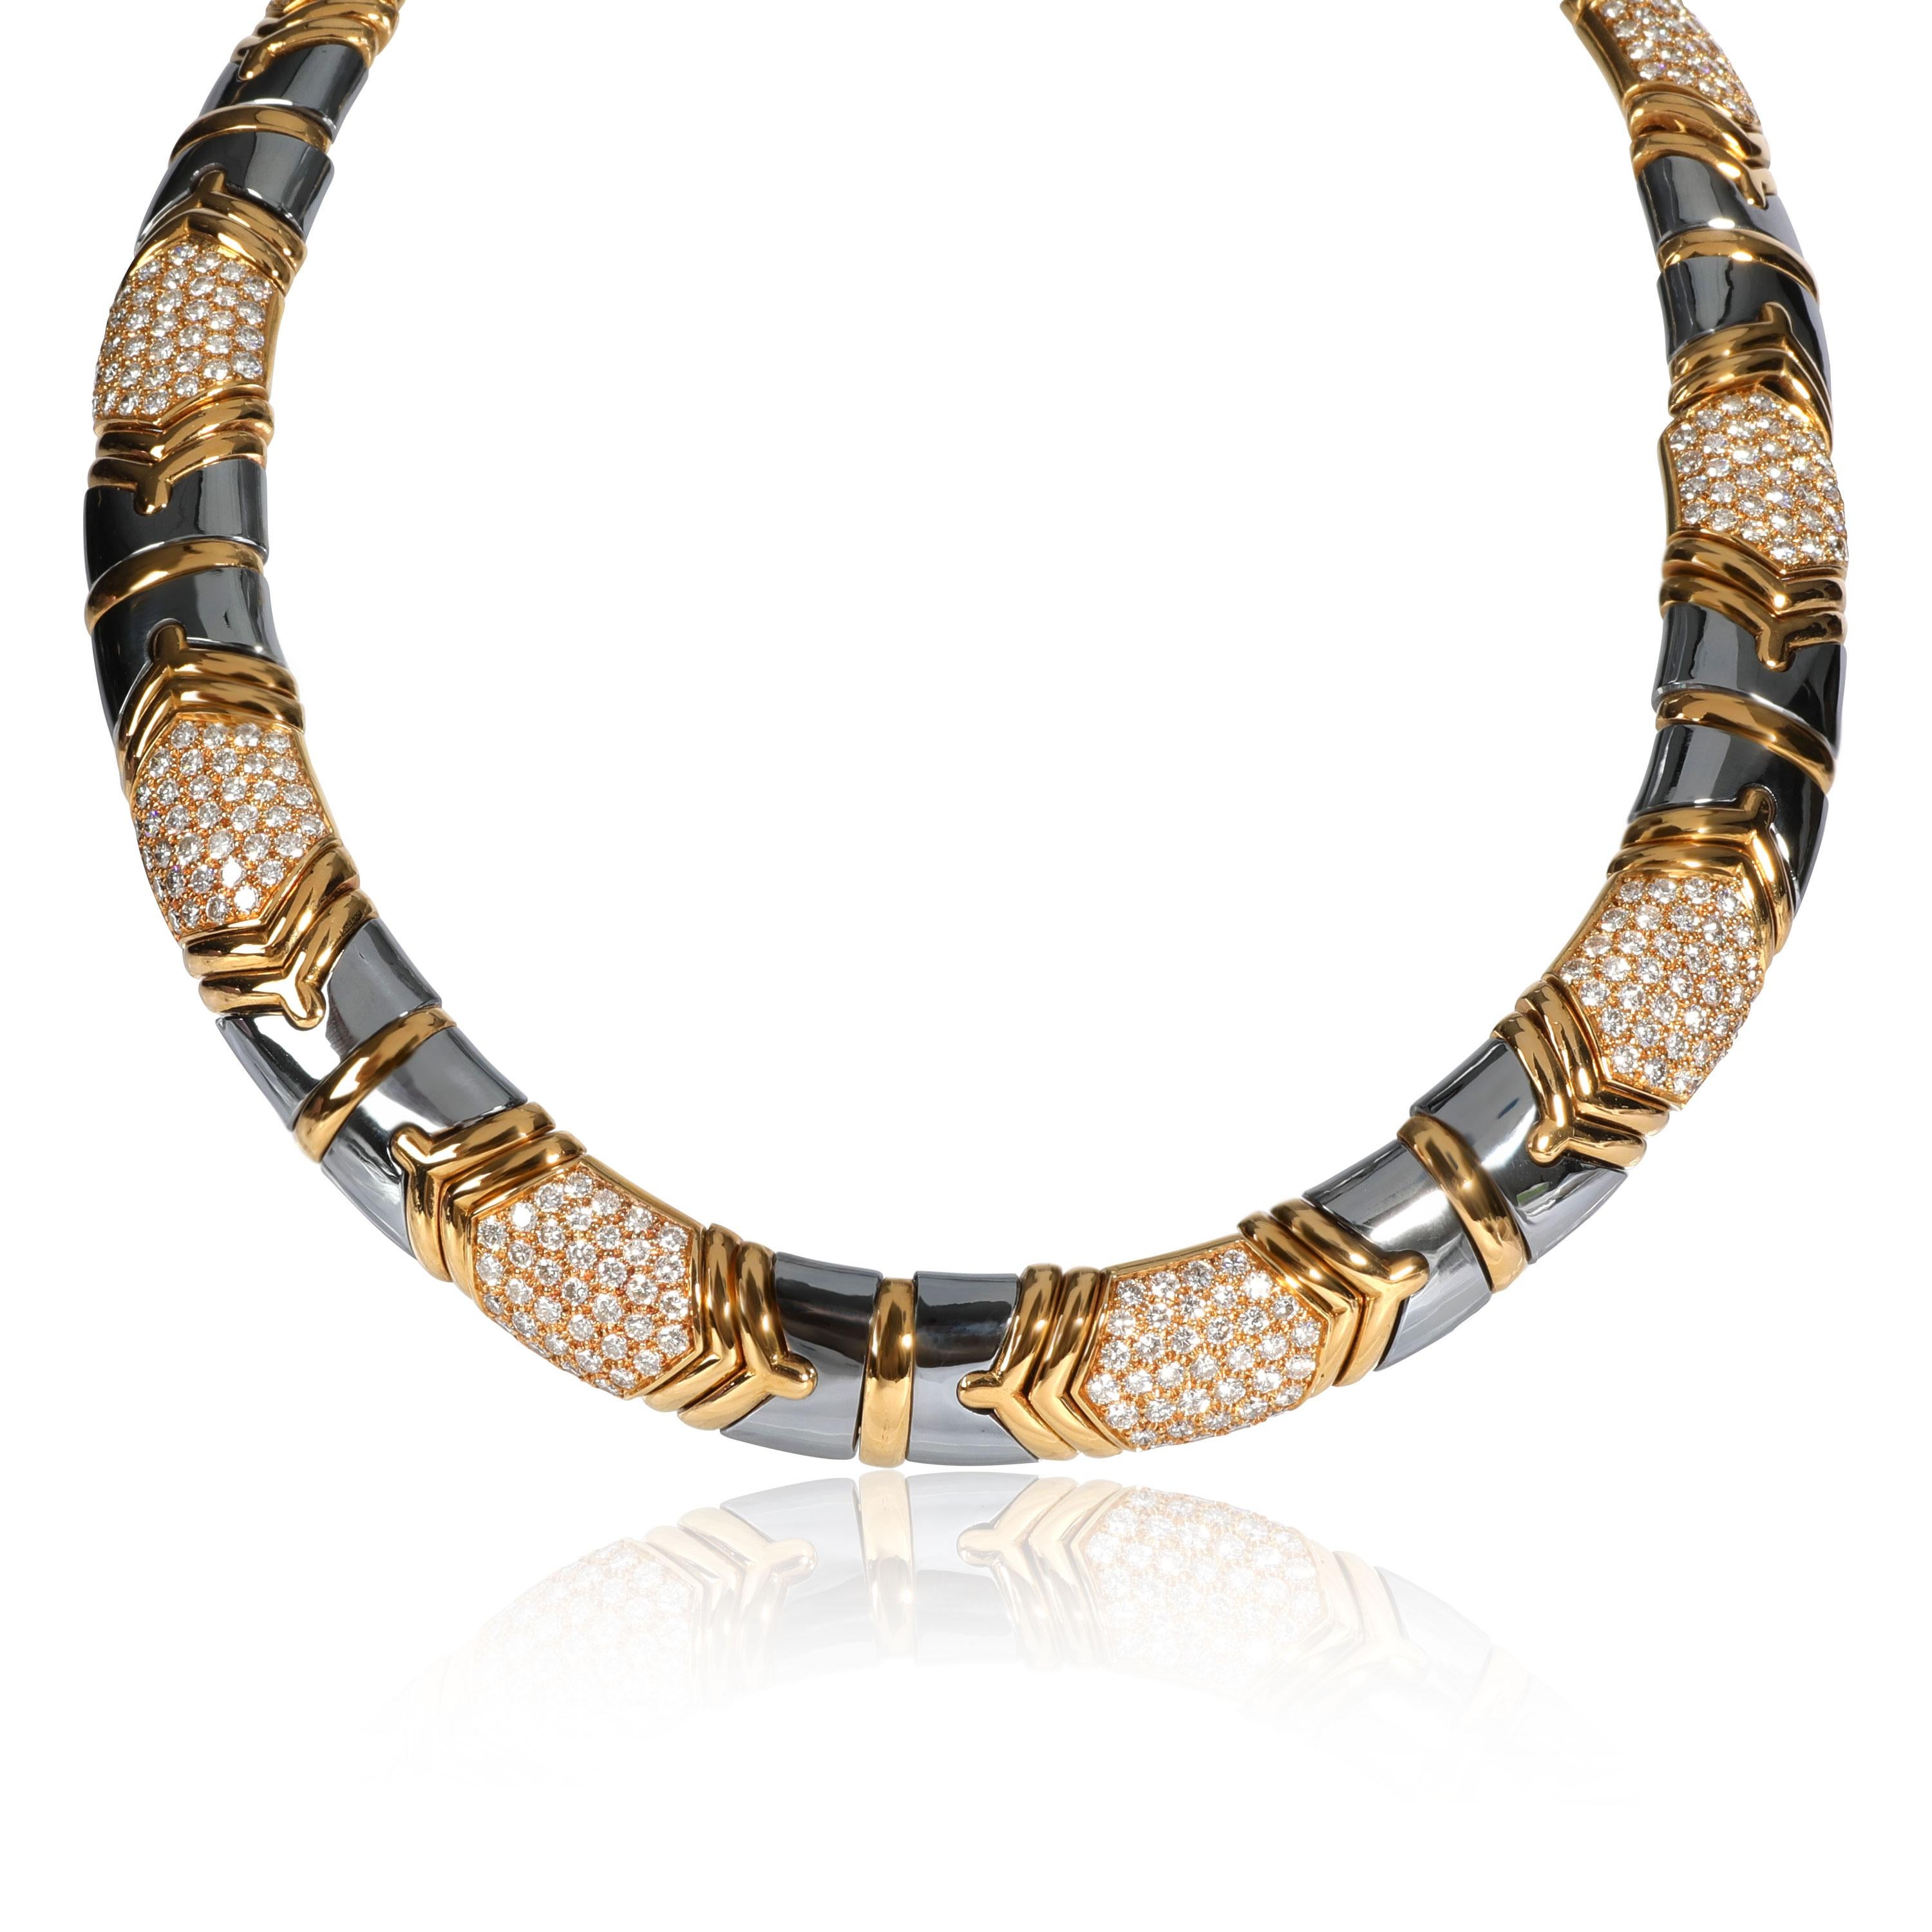 Bulgari Parentisi Diamond & Hematite Necklace in 18K Yellow Gold 11.51 CTW

PRIMARY DETAILS
SKU: 109984
Listing Title: Bulgari Parentisi Diamond & Hematite Necklace in 18K Yellow Gold 11.51 CTW
Condition Description: Retails for 68,000 USD. In